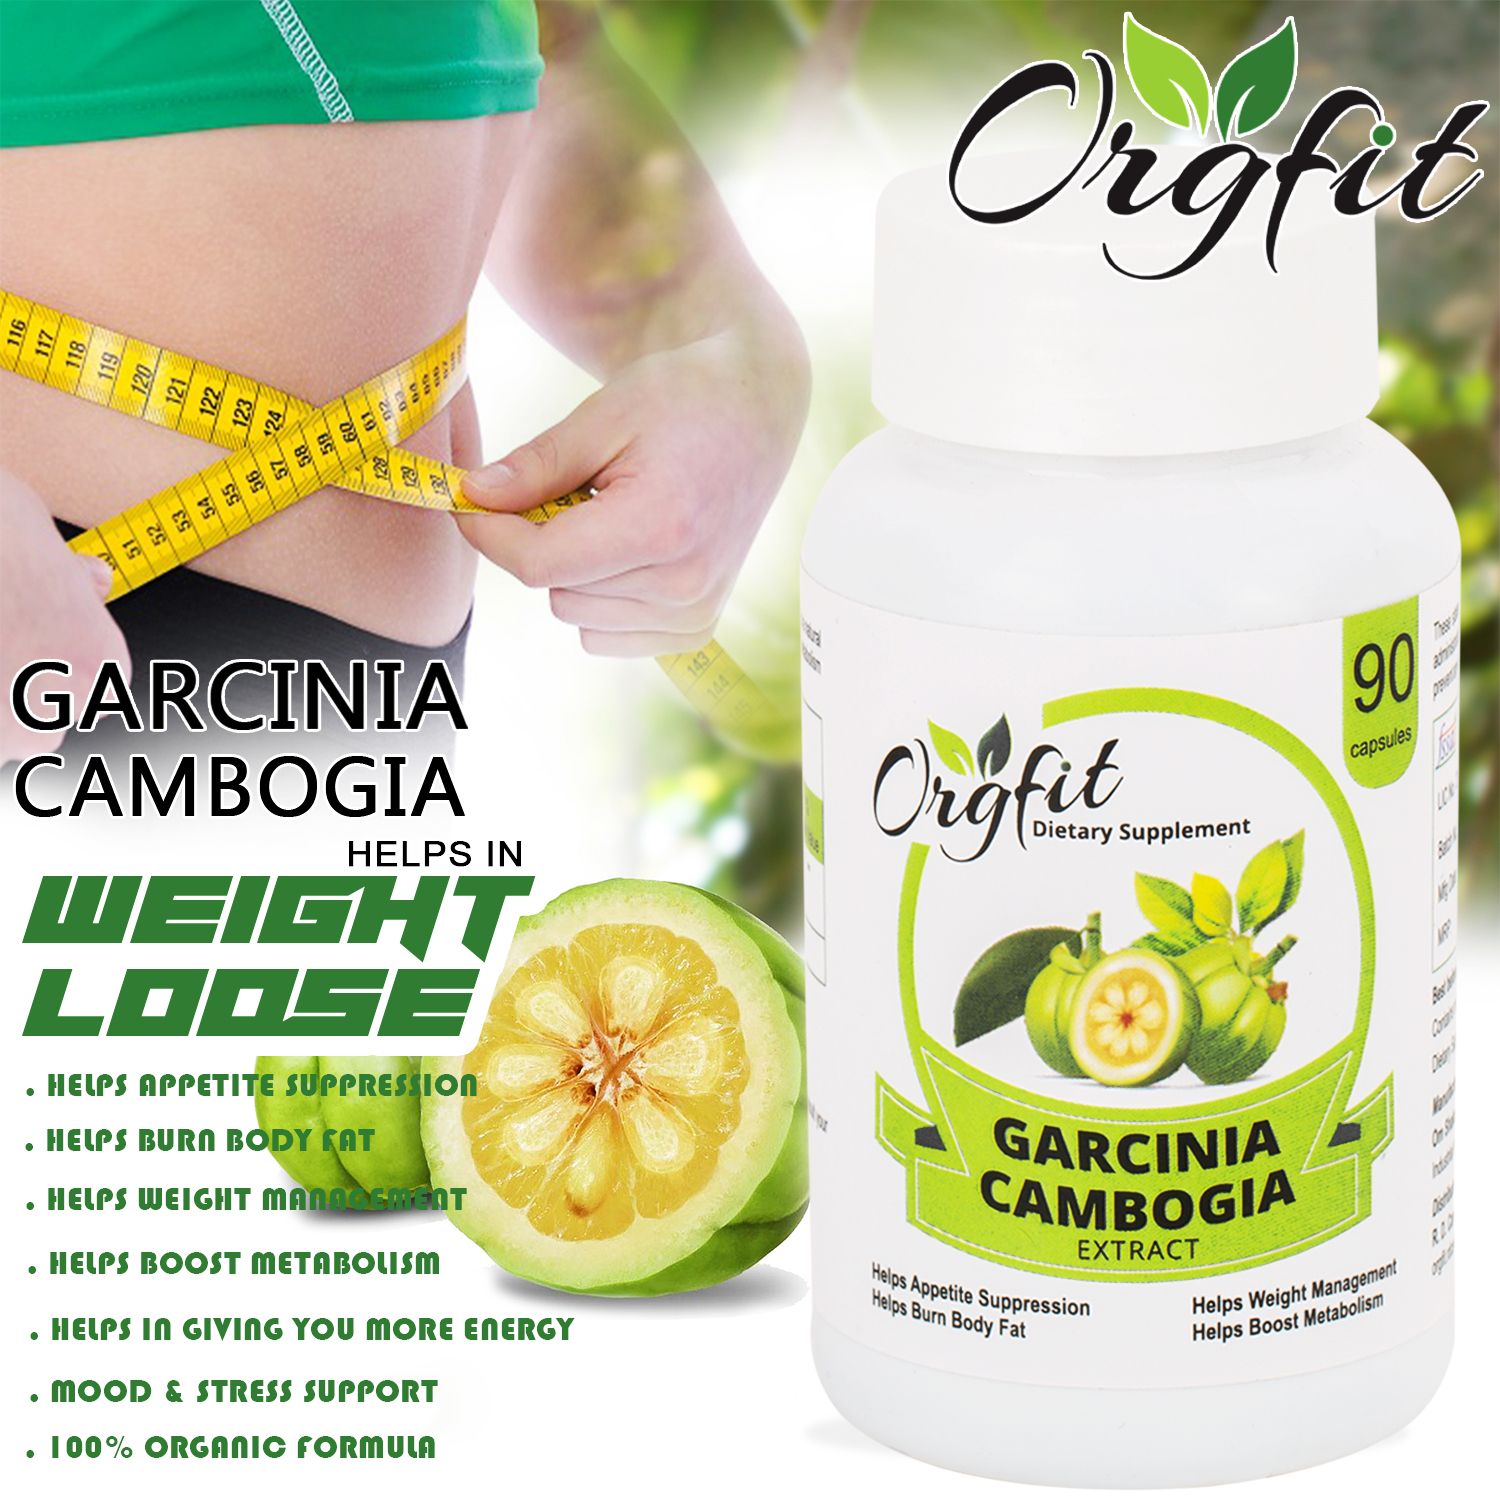 Orgfit Garcinia Cambogia For Weight Loss 90 Nos Fruit Buy Orgfit Garcinia Cambogia For Weight 1856